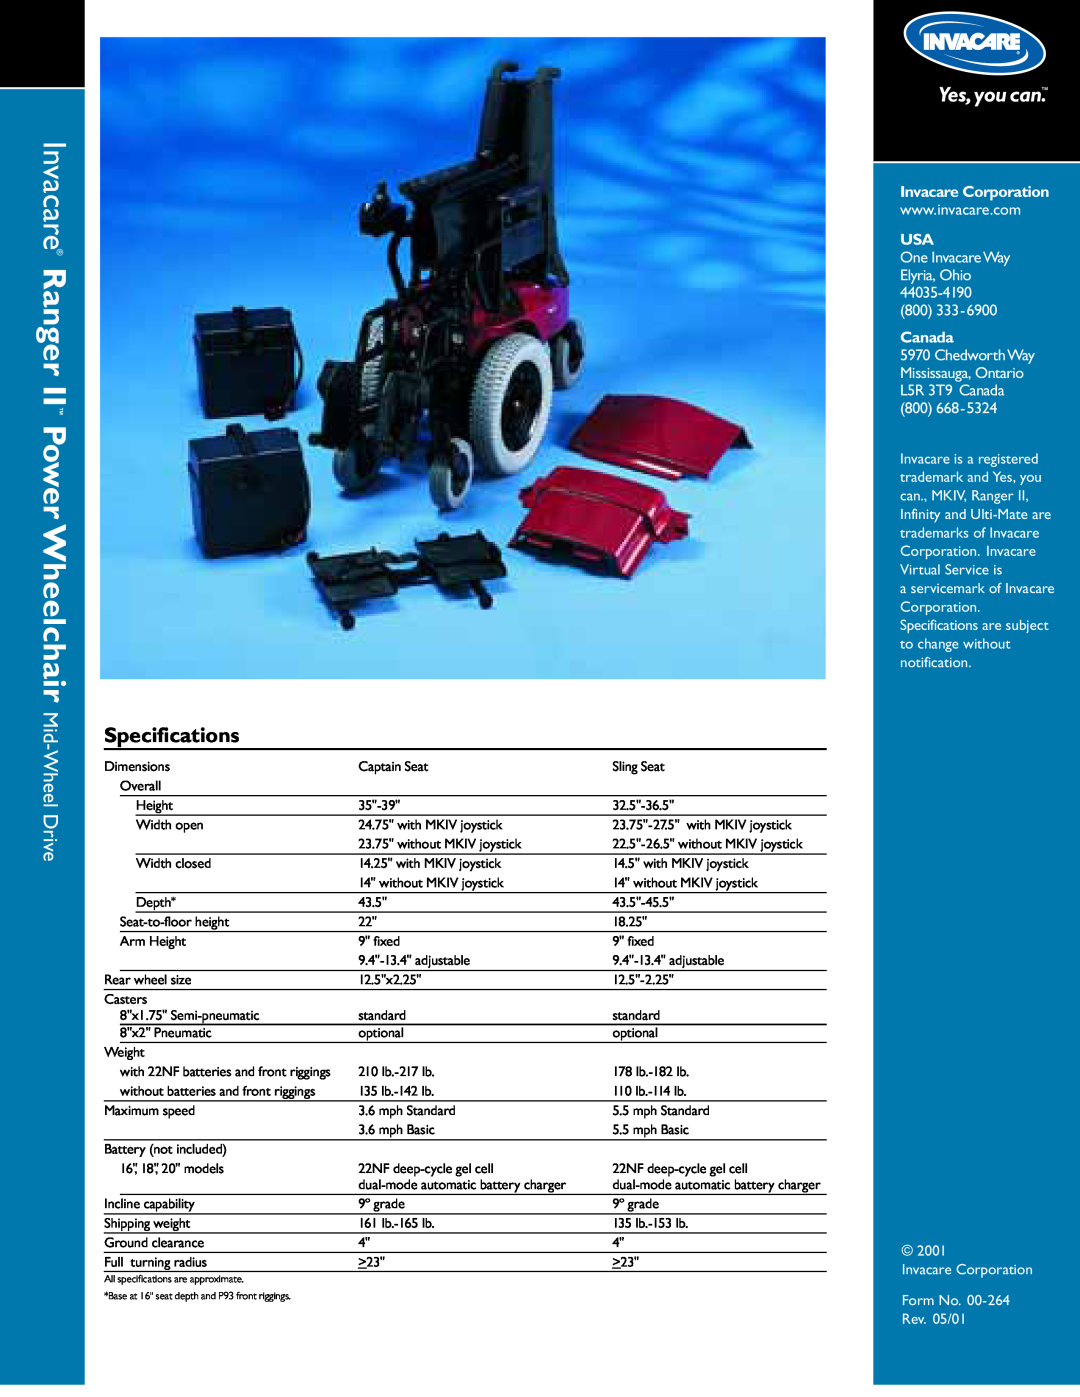 Invacare 22NF specifications Invacare Ranger II Power Wheelchair Mid-Wheel Drive, Specifications, Invacare Corporation 